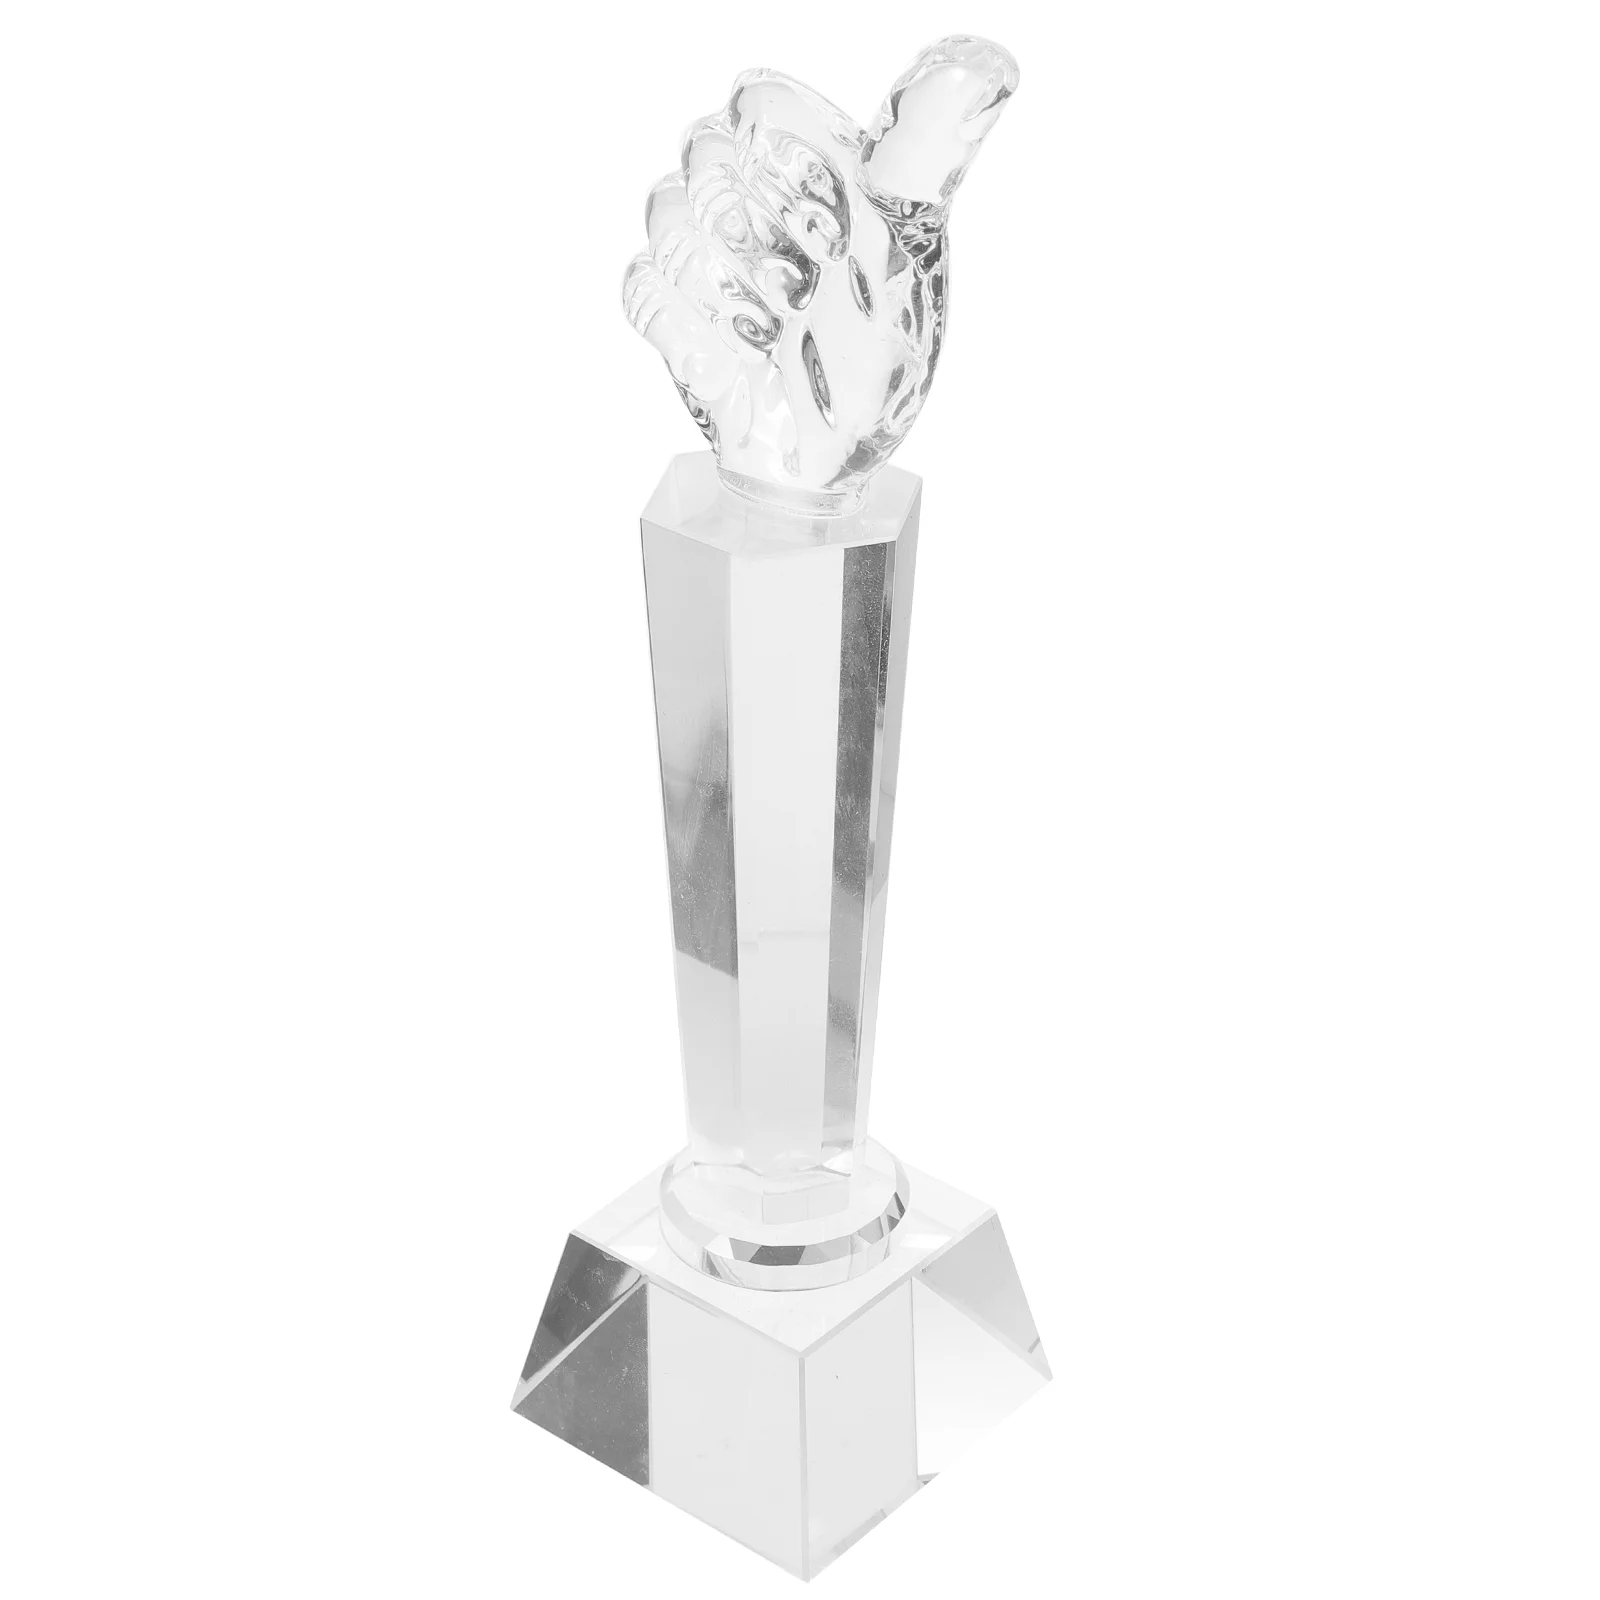 

Trophy Decor Thumbs up Trophies Award Workers Gifts Crystal for Adults Aldult Office